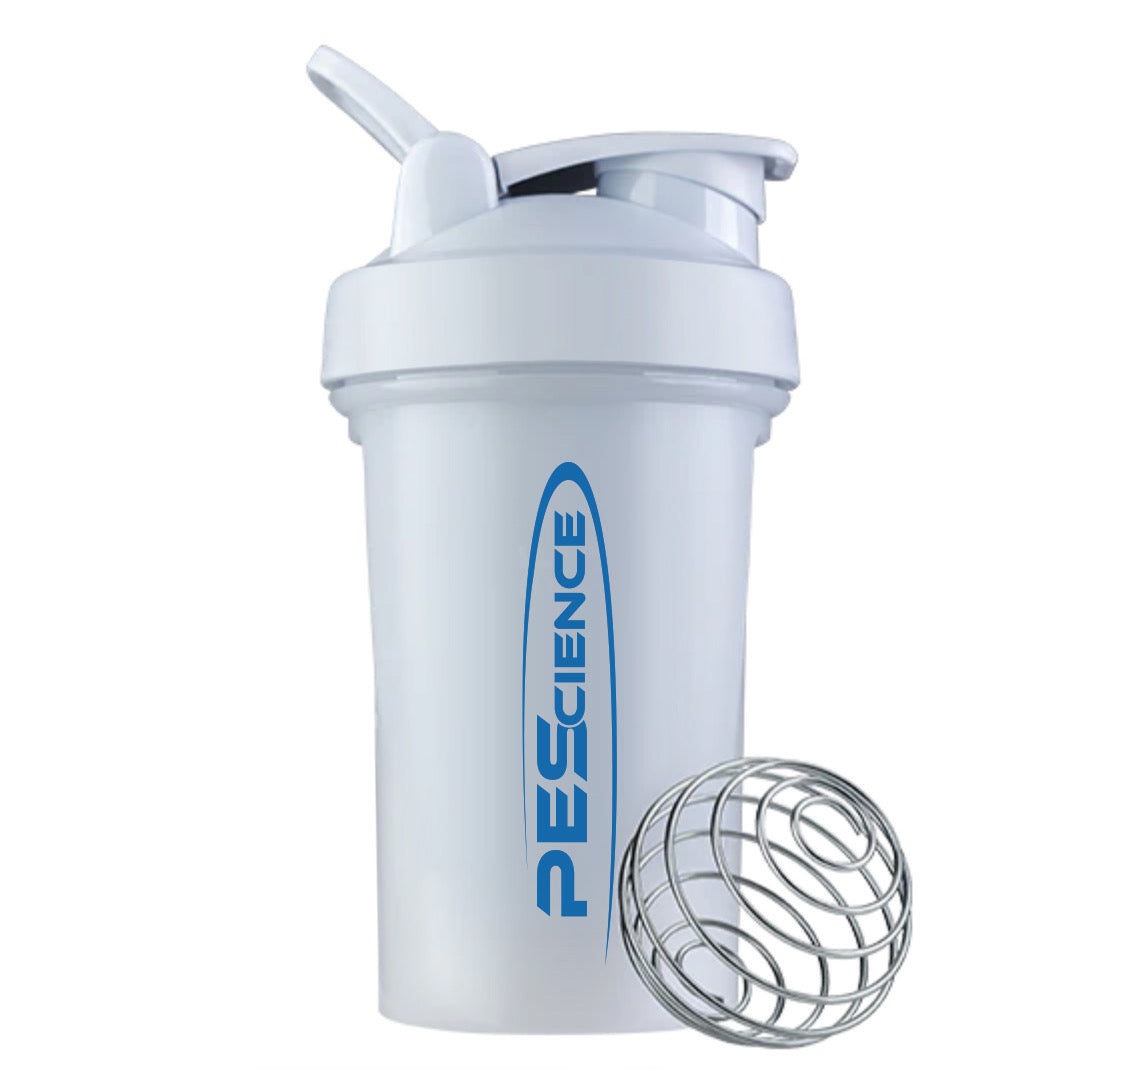 ShakeSphere : Patented Protein Shaker Bottle designed by an International  Athlete – PAC Talks